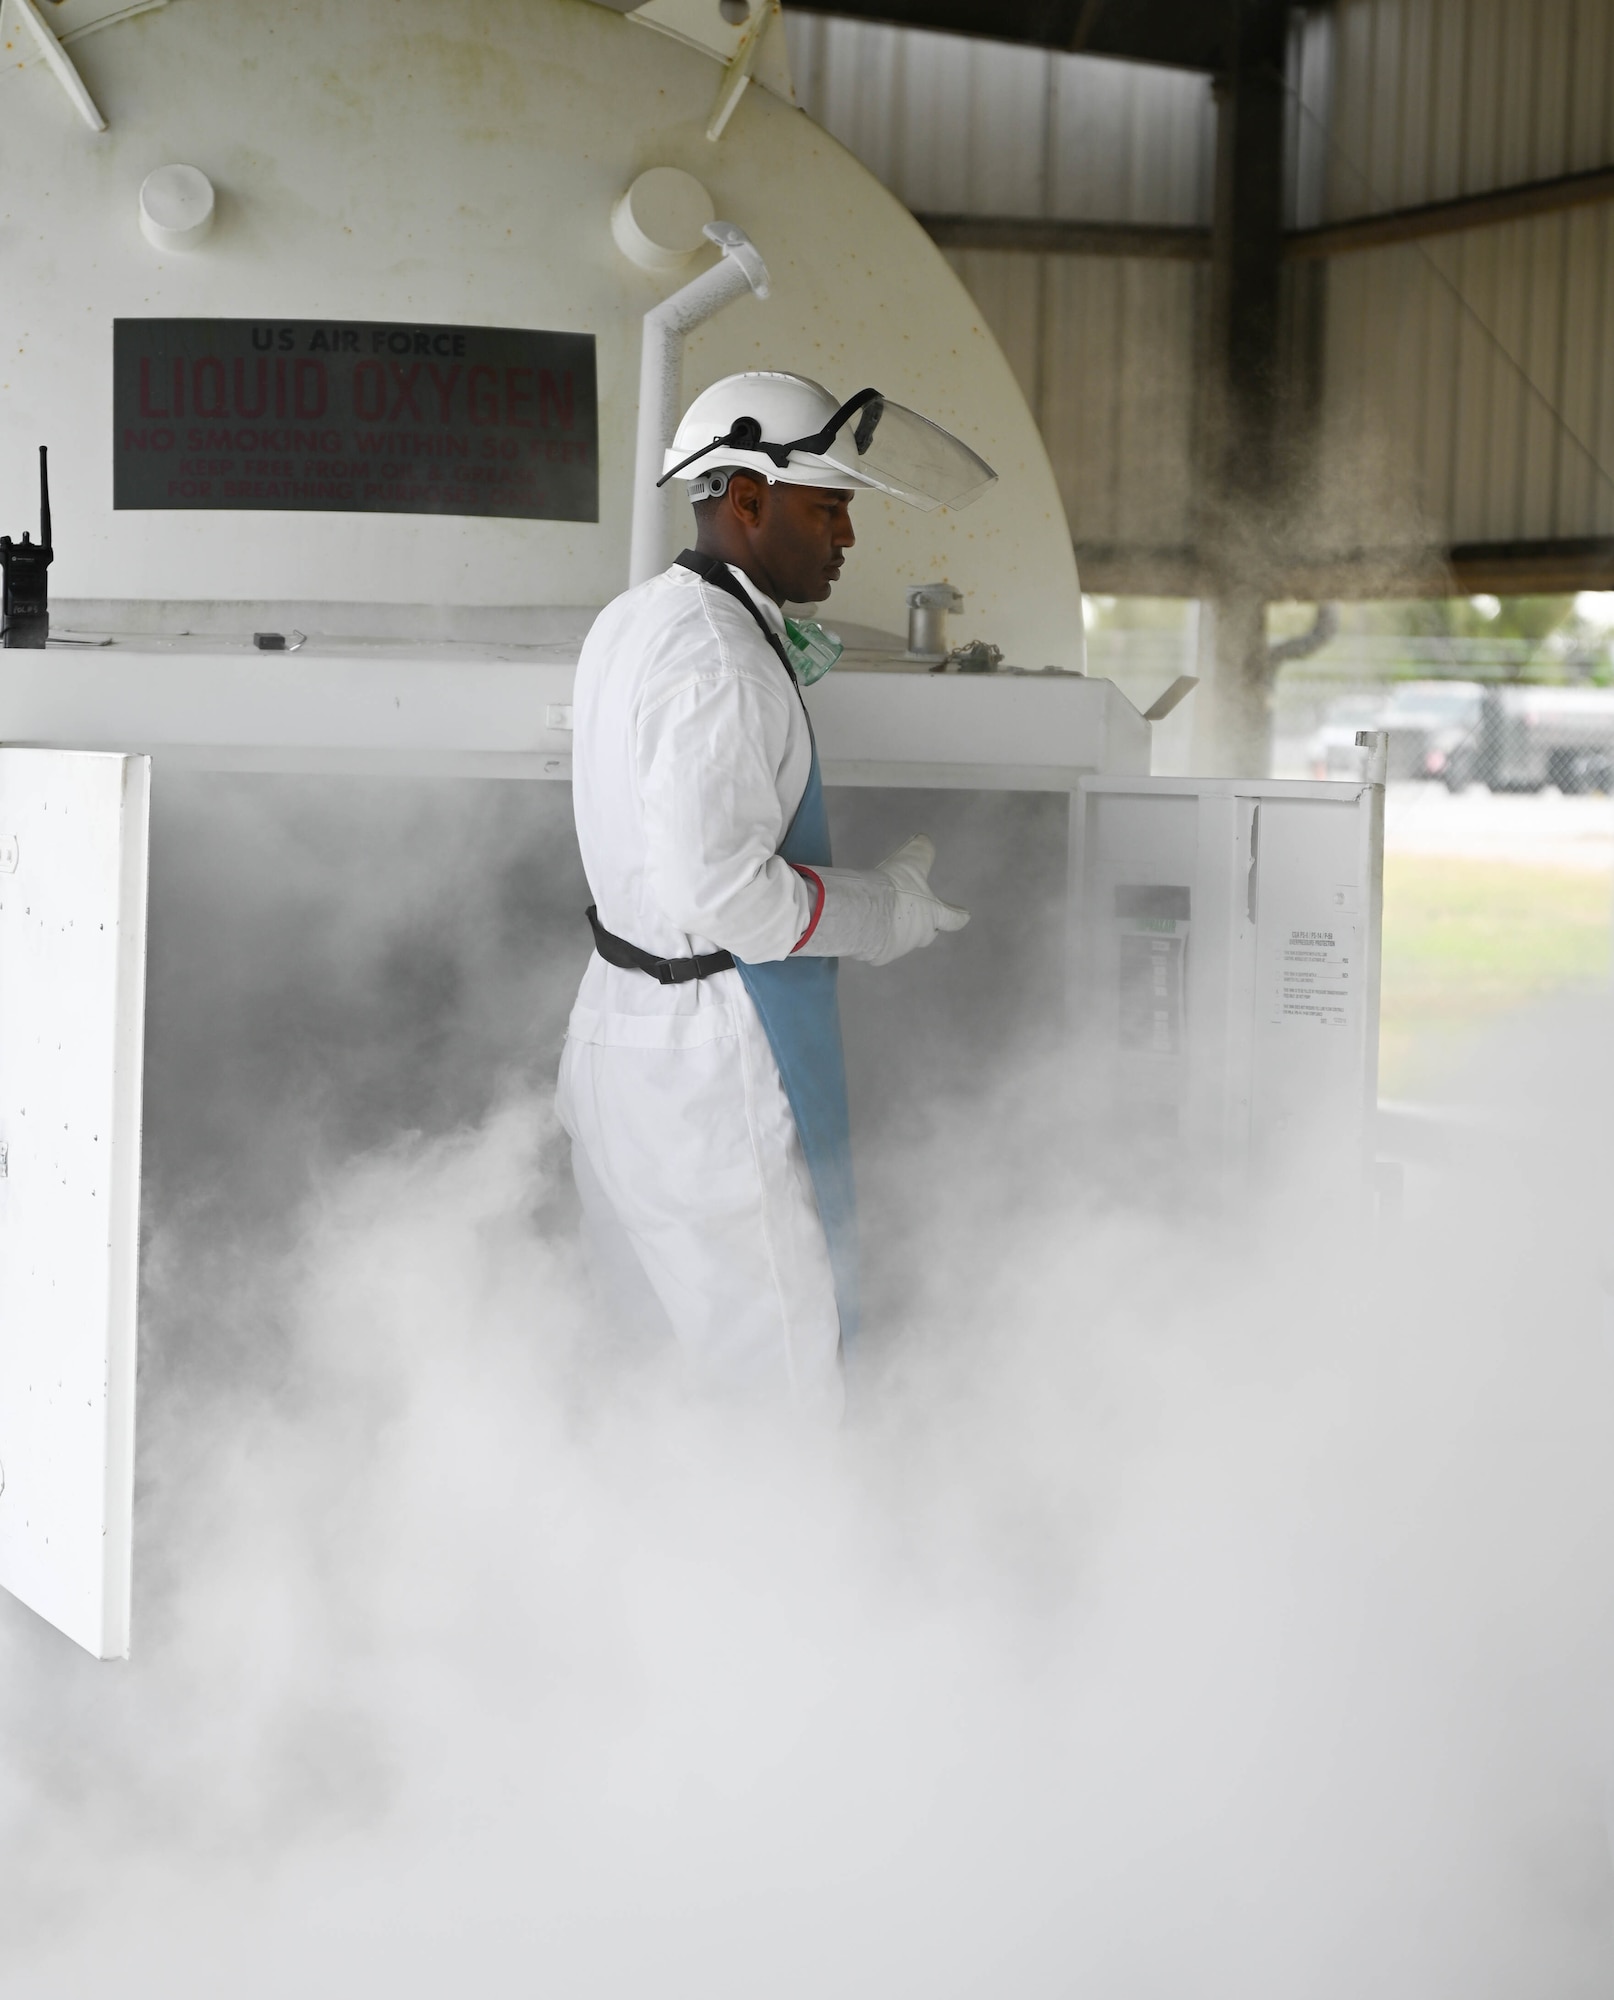 An Airmen in protective equipment stands in mist during a LOX quality control test